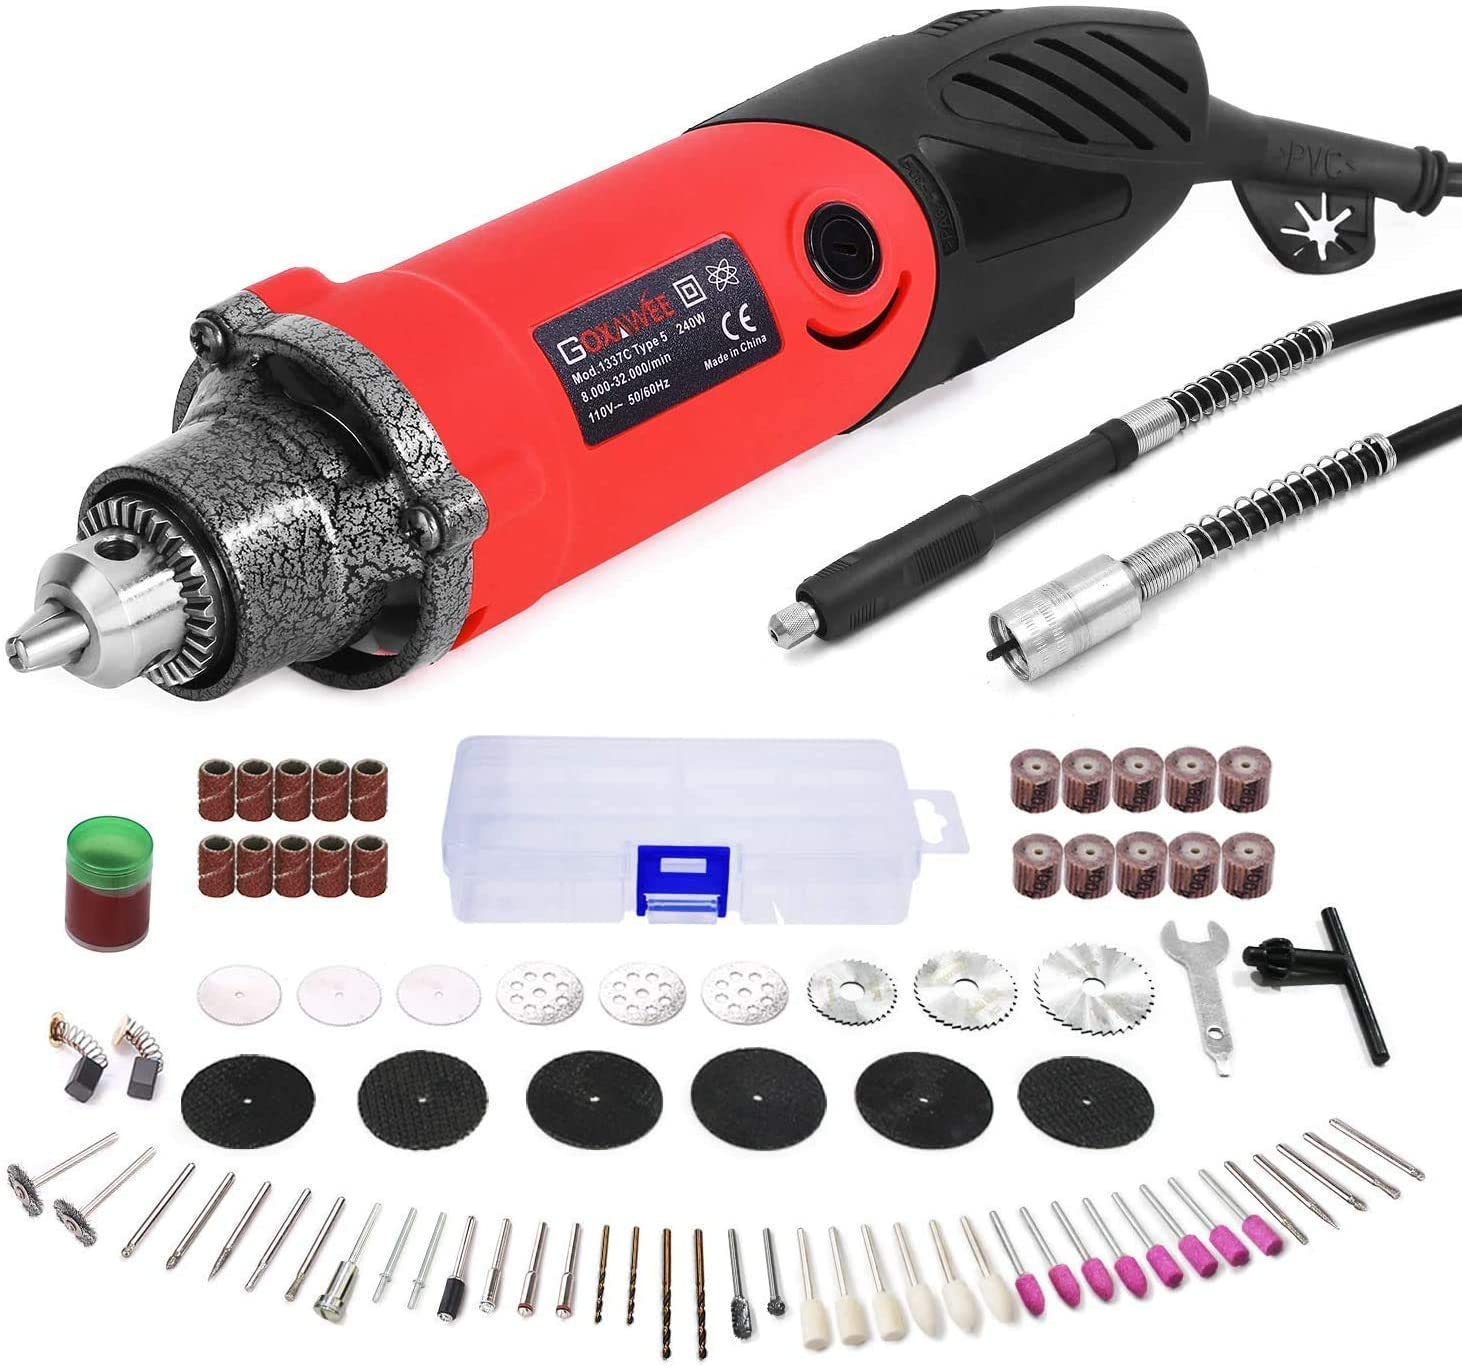 240W Rotary Tool Set, GOXAWEE Power Die Grinder Set with 1/4 Inch 3-Jaw Chuck (0.5-4 mm), 6 Step Variable Speed, Advanced Flex Shaft & 82Pcs Multifunctional Accessories for DIY Projects